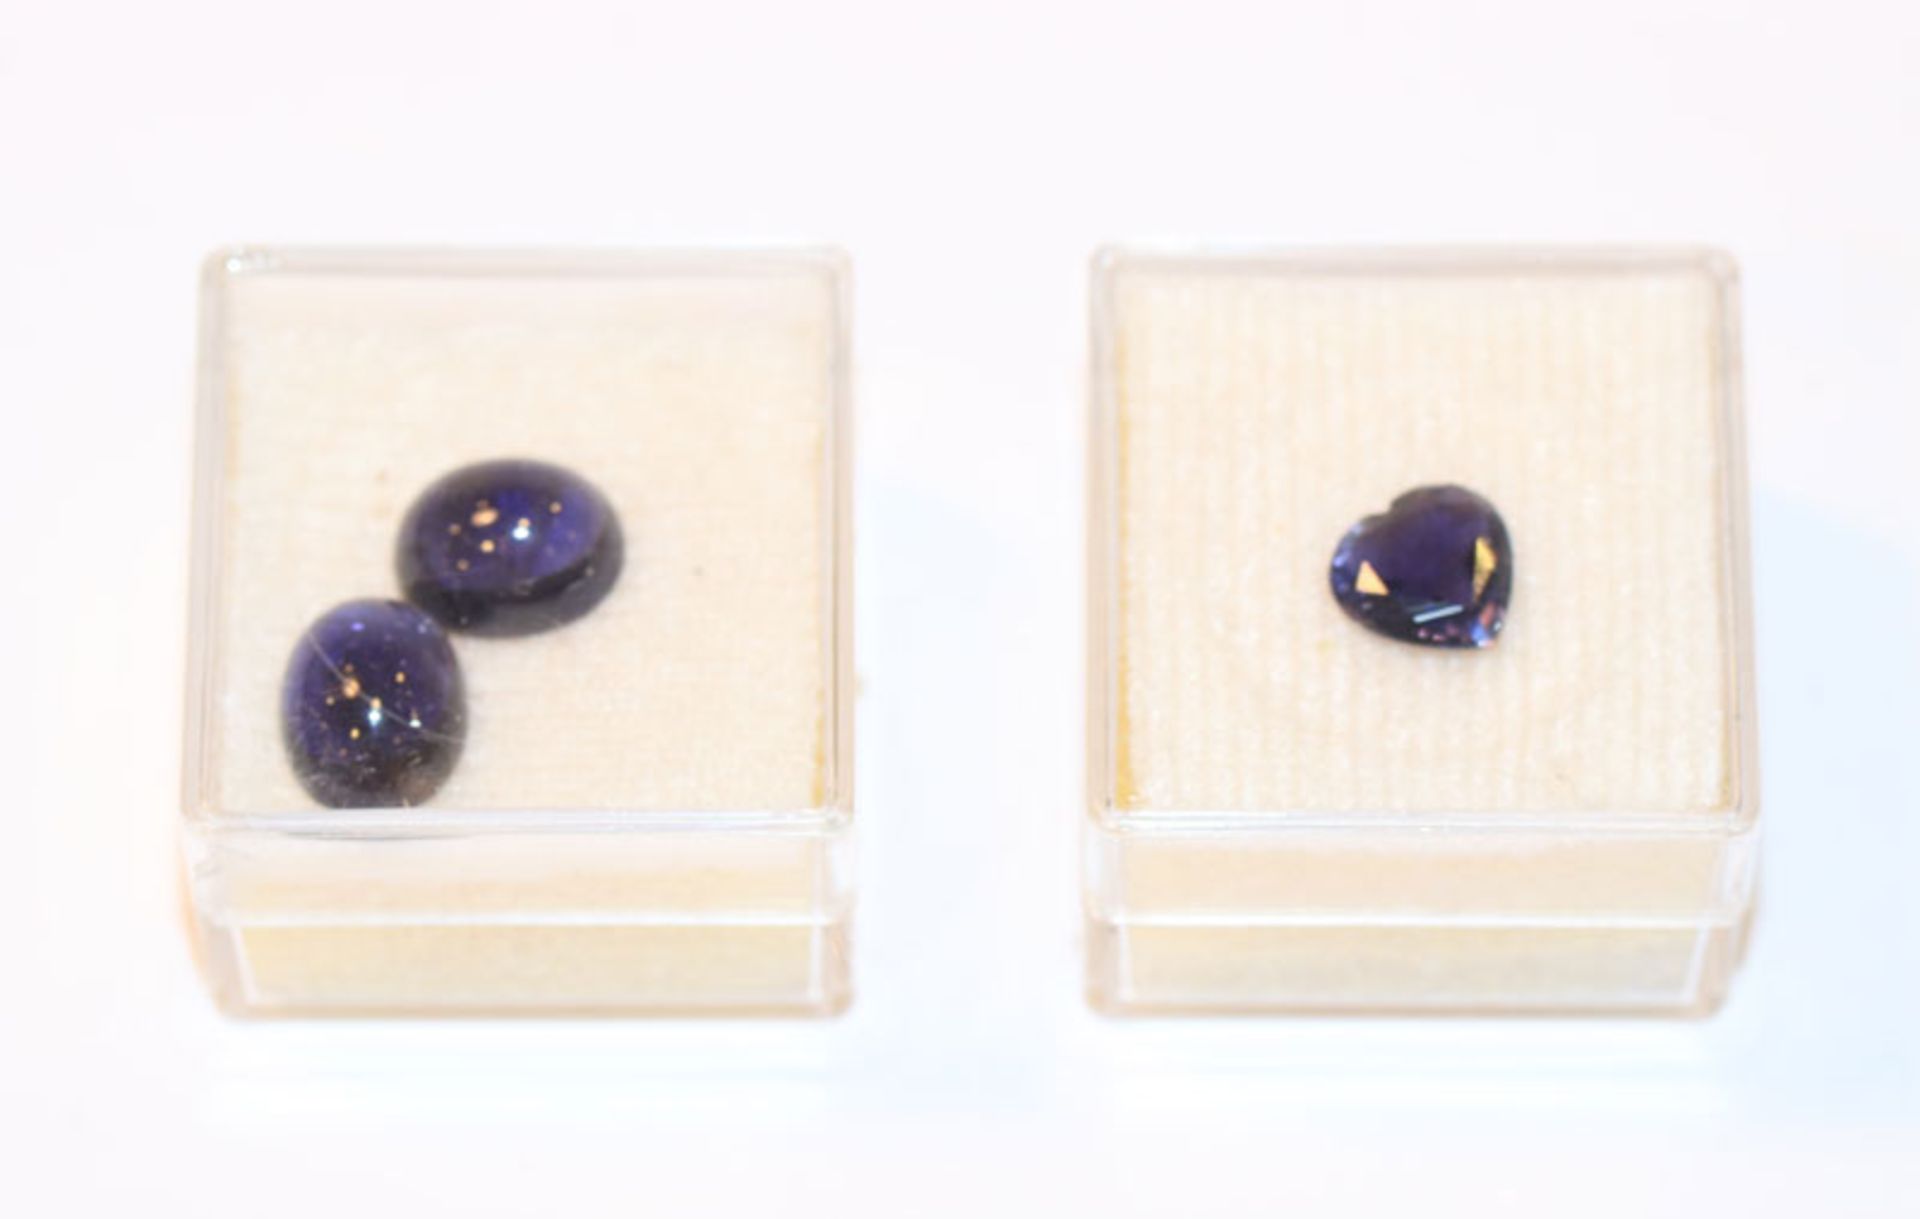 2 ovale Iolith Cabochons, 5,72 ct. und Iolith in facettierter Herzform, 1,25 ct.